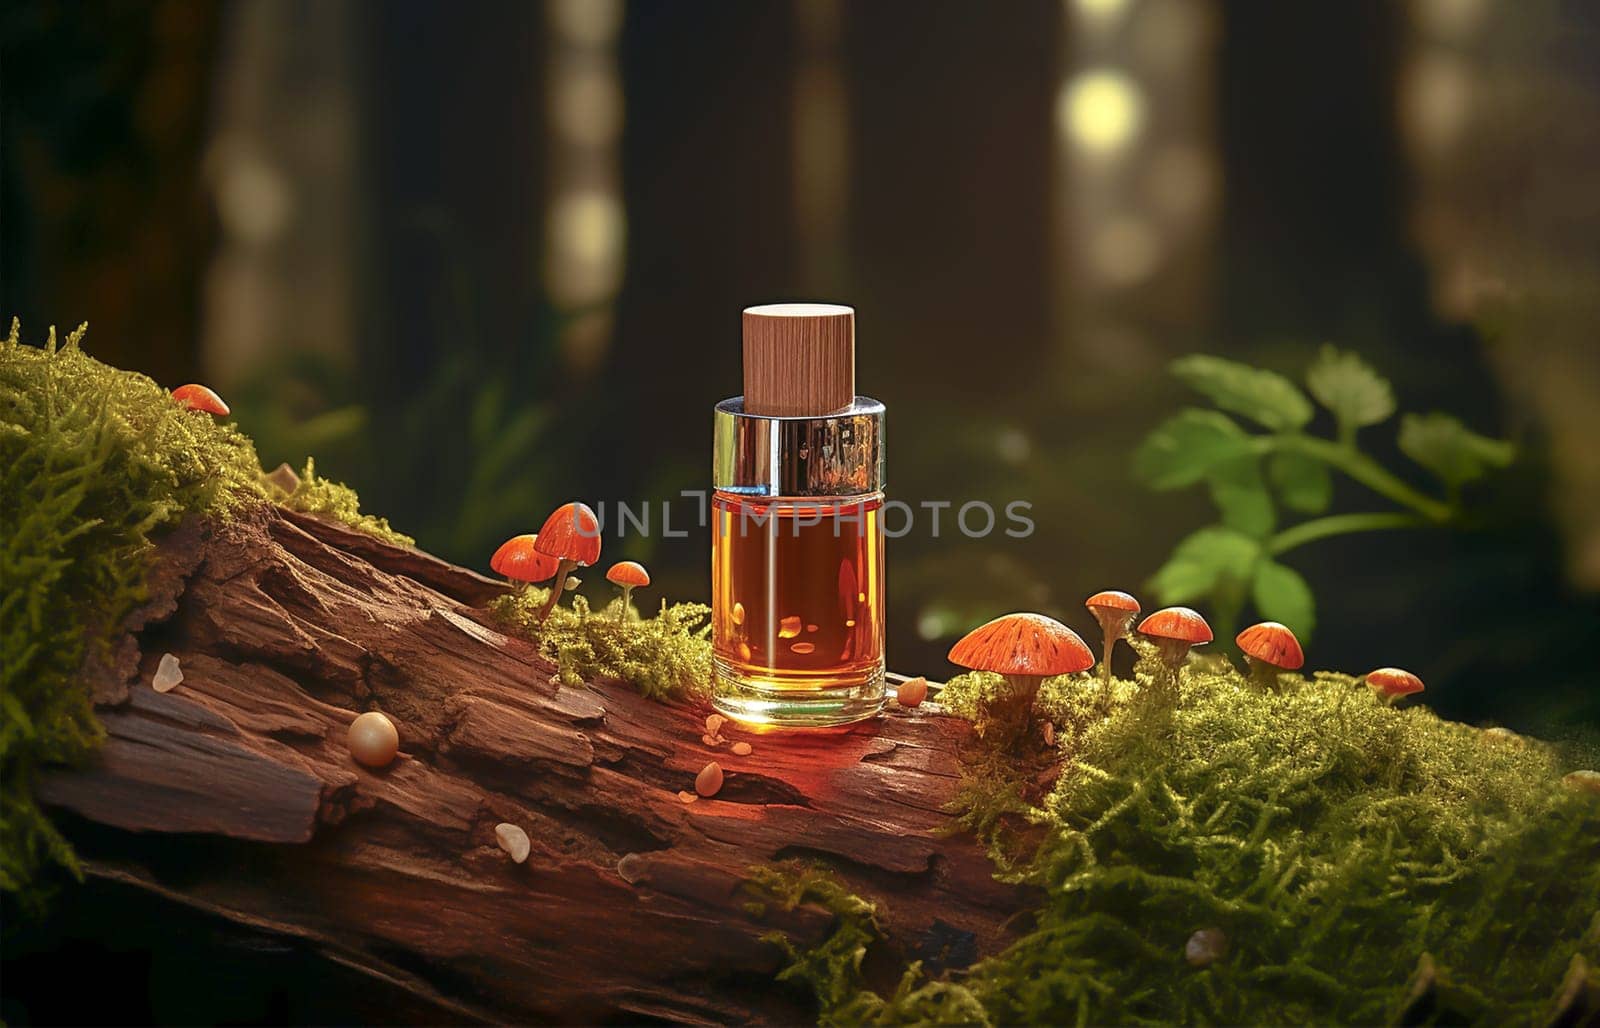 cosmetic ingredient Pycnogenol or Pinus pinaster in dark bottle stands on the bark of an oak covered with moss in forest. Natural cosmetic ingredient. Antioxidant. Serum with bark extract for face